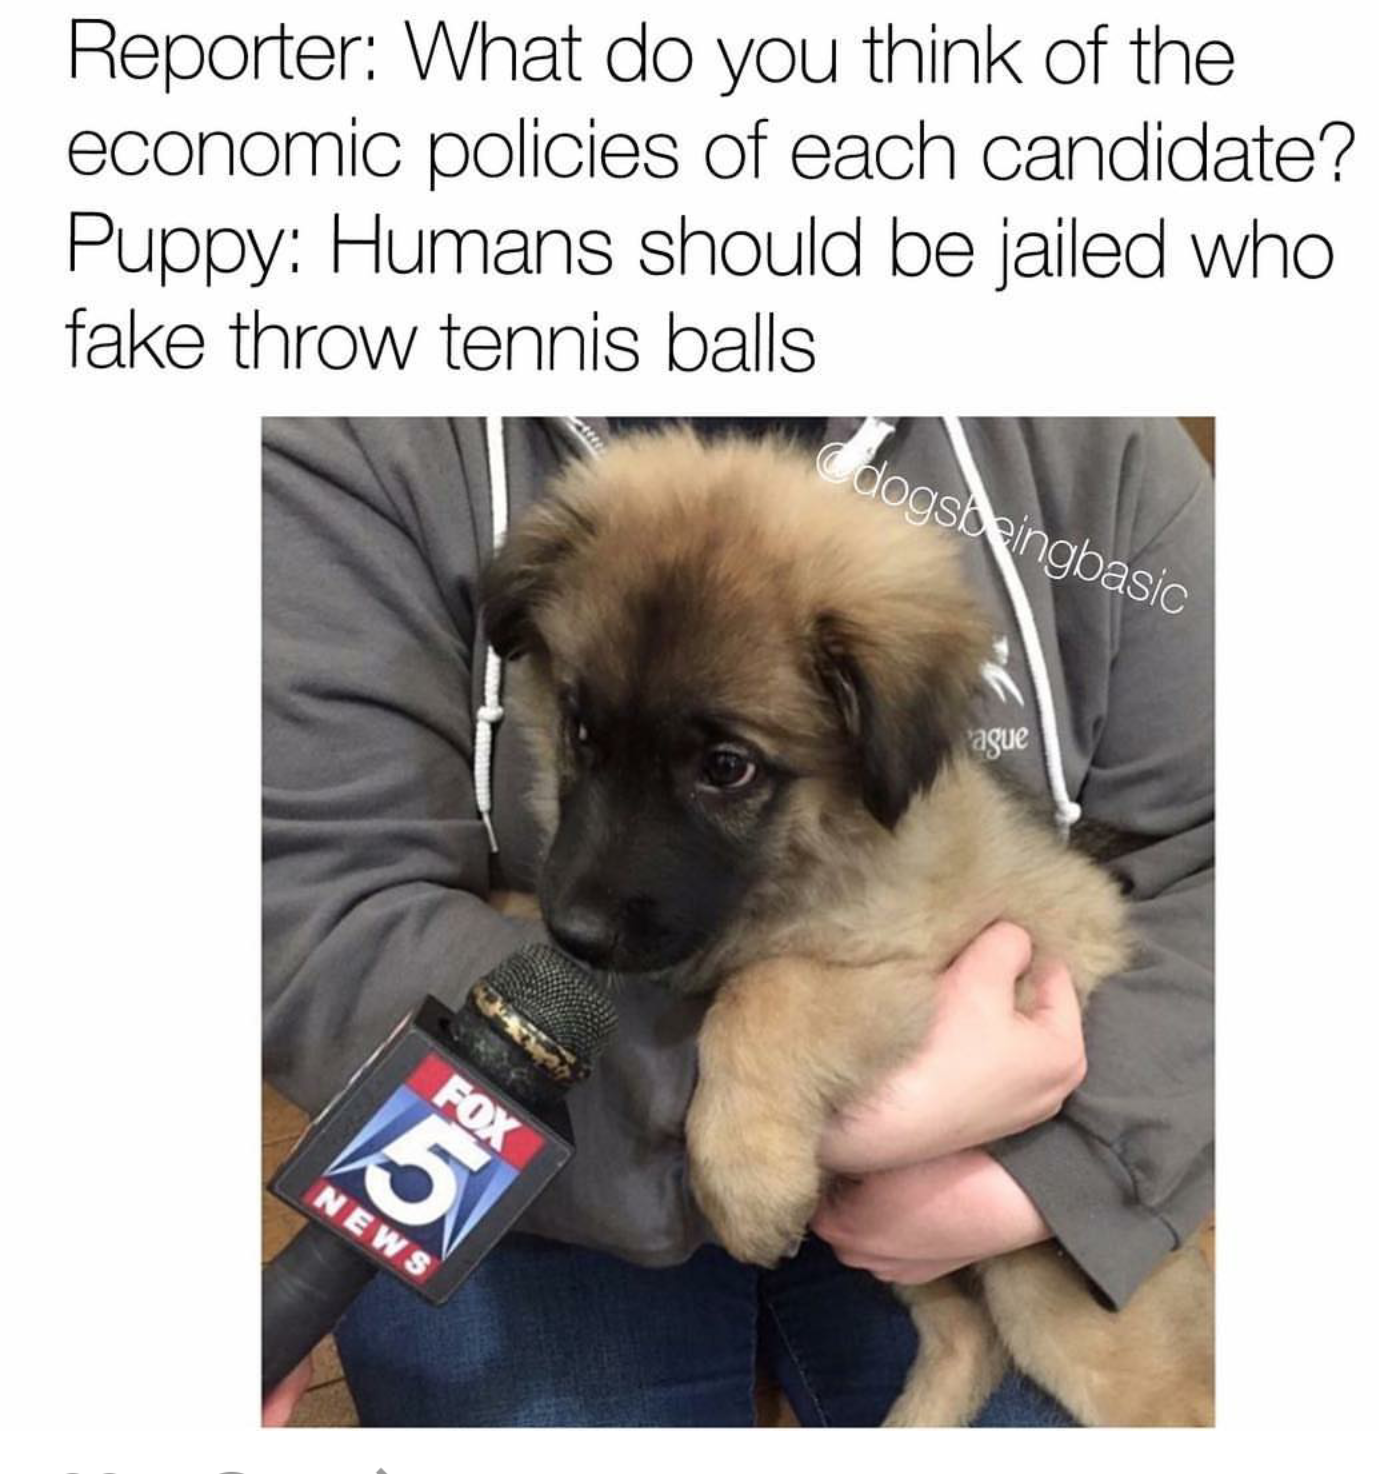 memes - finally an opinion that matters - Reporter What do you think of the economic policies of each candidate? Puppy Humans should be jailed who fake throw tennis balls dogshingbasic